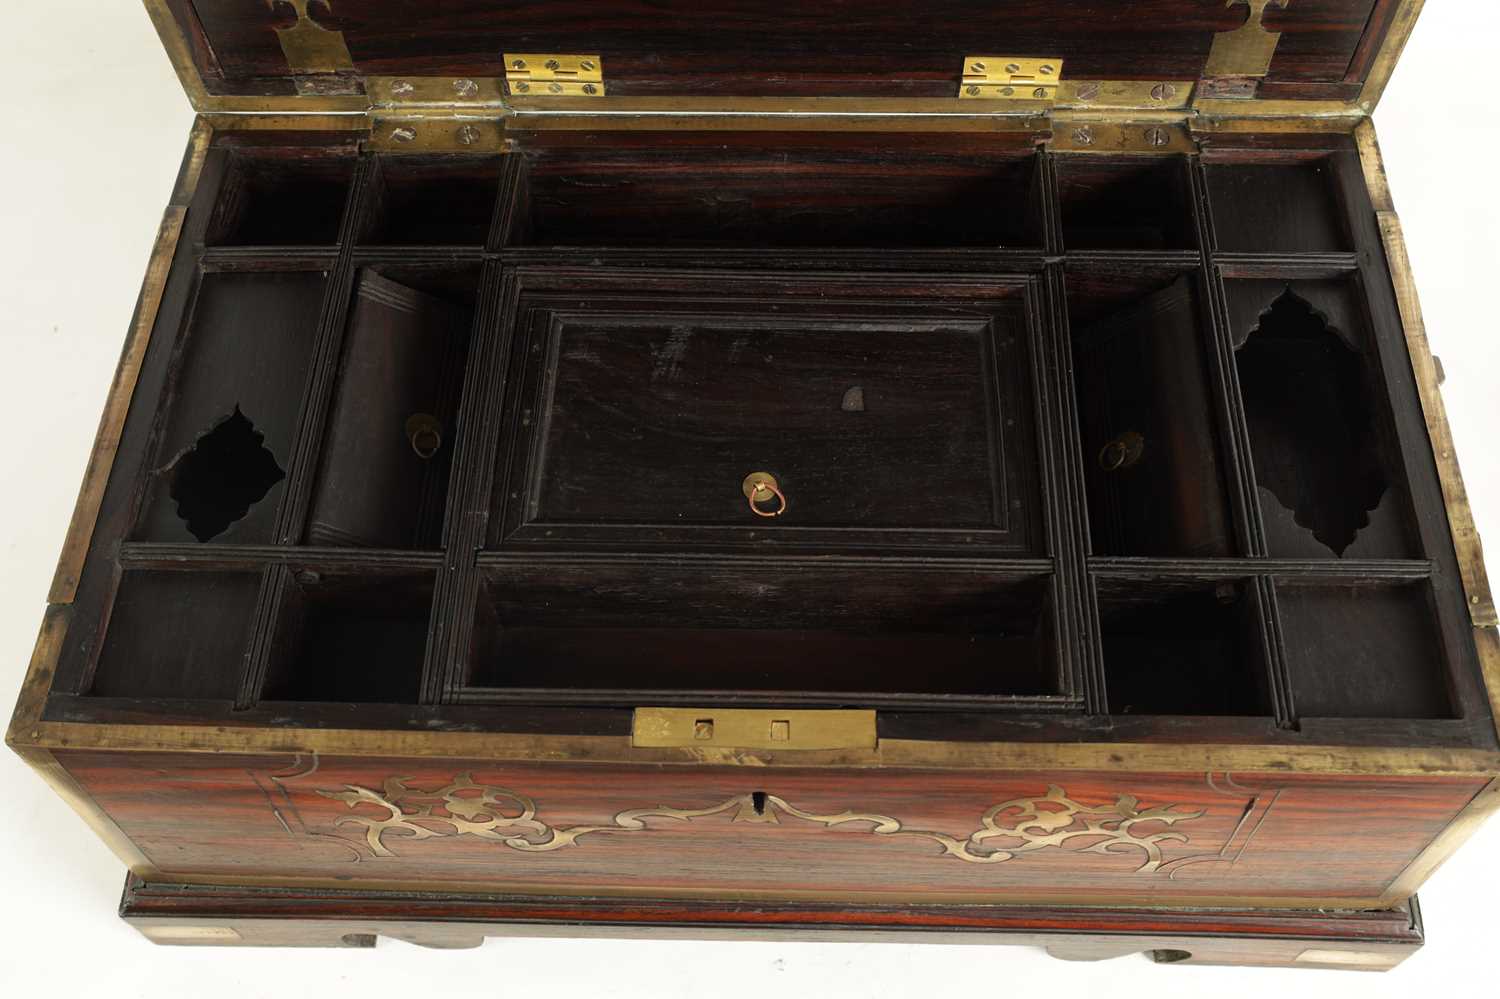 AN 18TH/EARLY 19TH CENTURY BRASS INLAID ANGLO INDIAN HARDWOOD FITTED BOX - Image 6 of 9